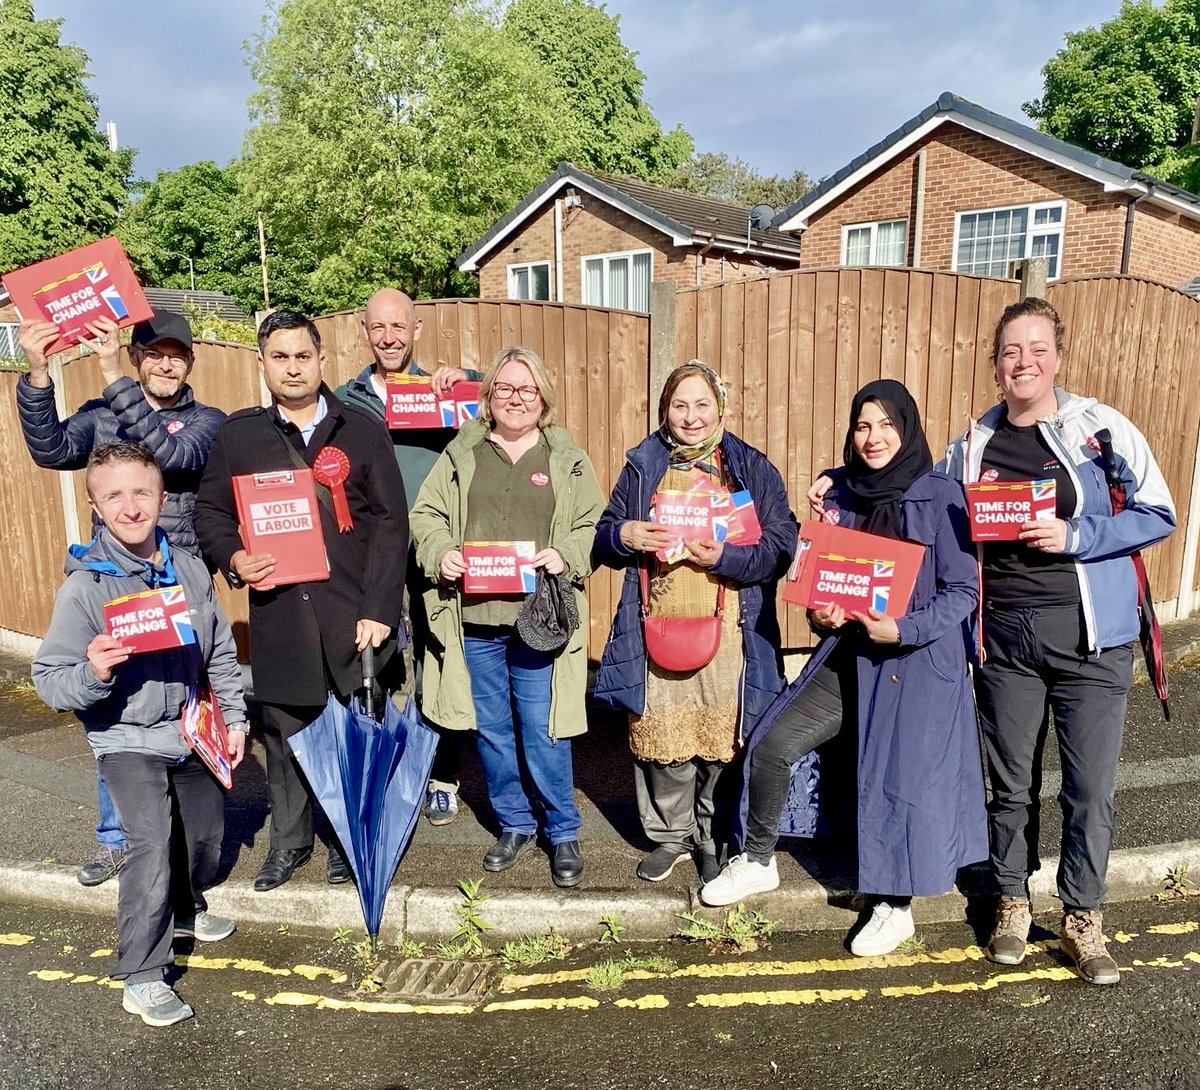 We powered on through a thunderstorm on day 5 and spoke to almost 100 people in Radcliffe North & Ainsworth Ward. Day 6 in Redvales Ward of Bury North where residents are ready for a change.🌹#VoteLabour #GeneralElections